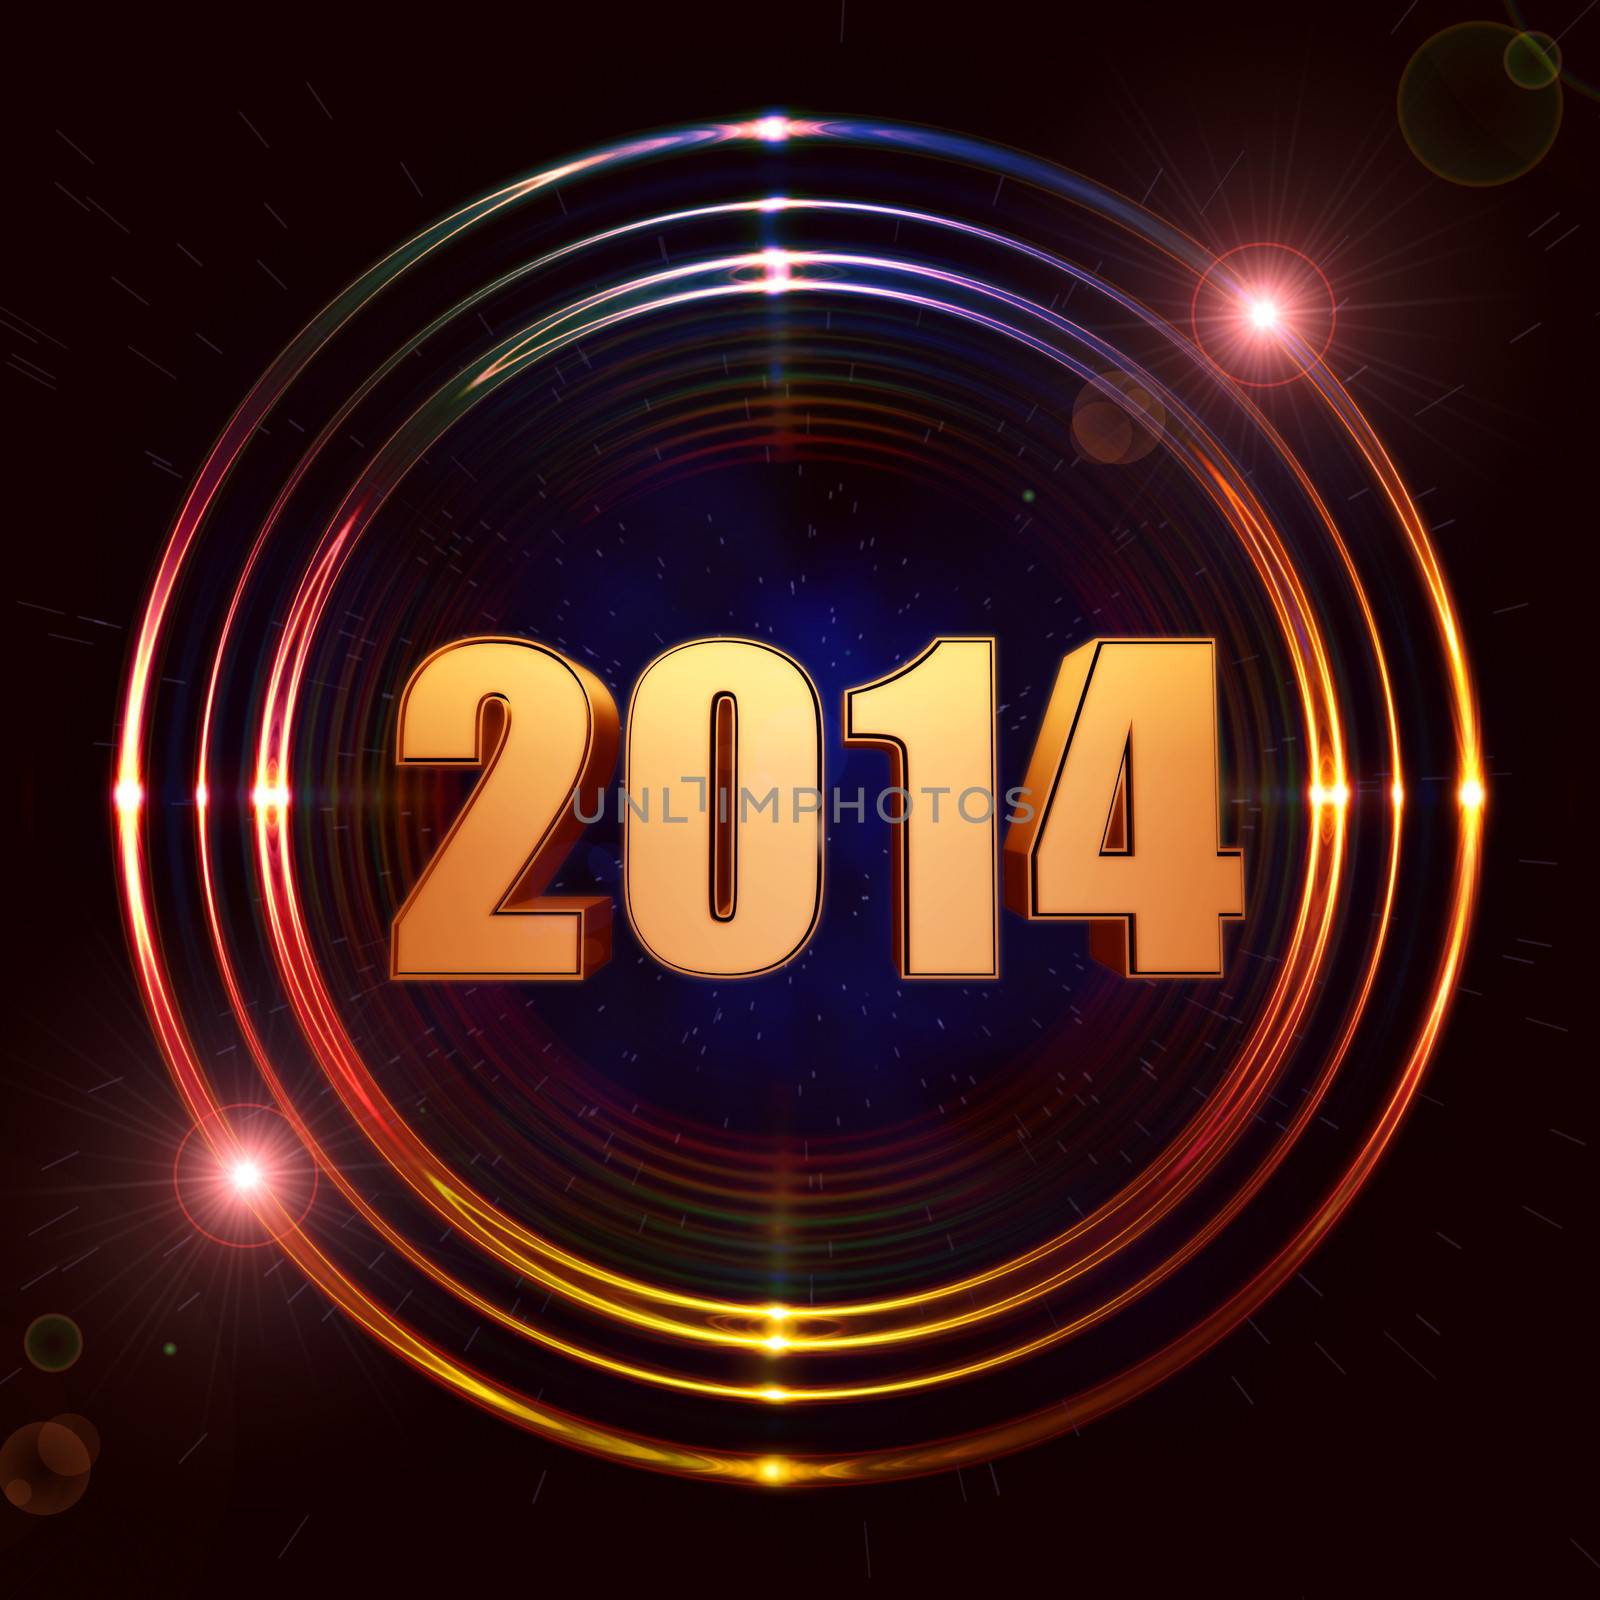 new year 2014 in abstract golden rings shining over dark background with stars and lights